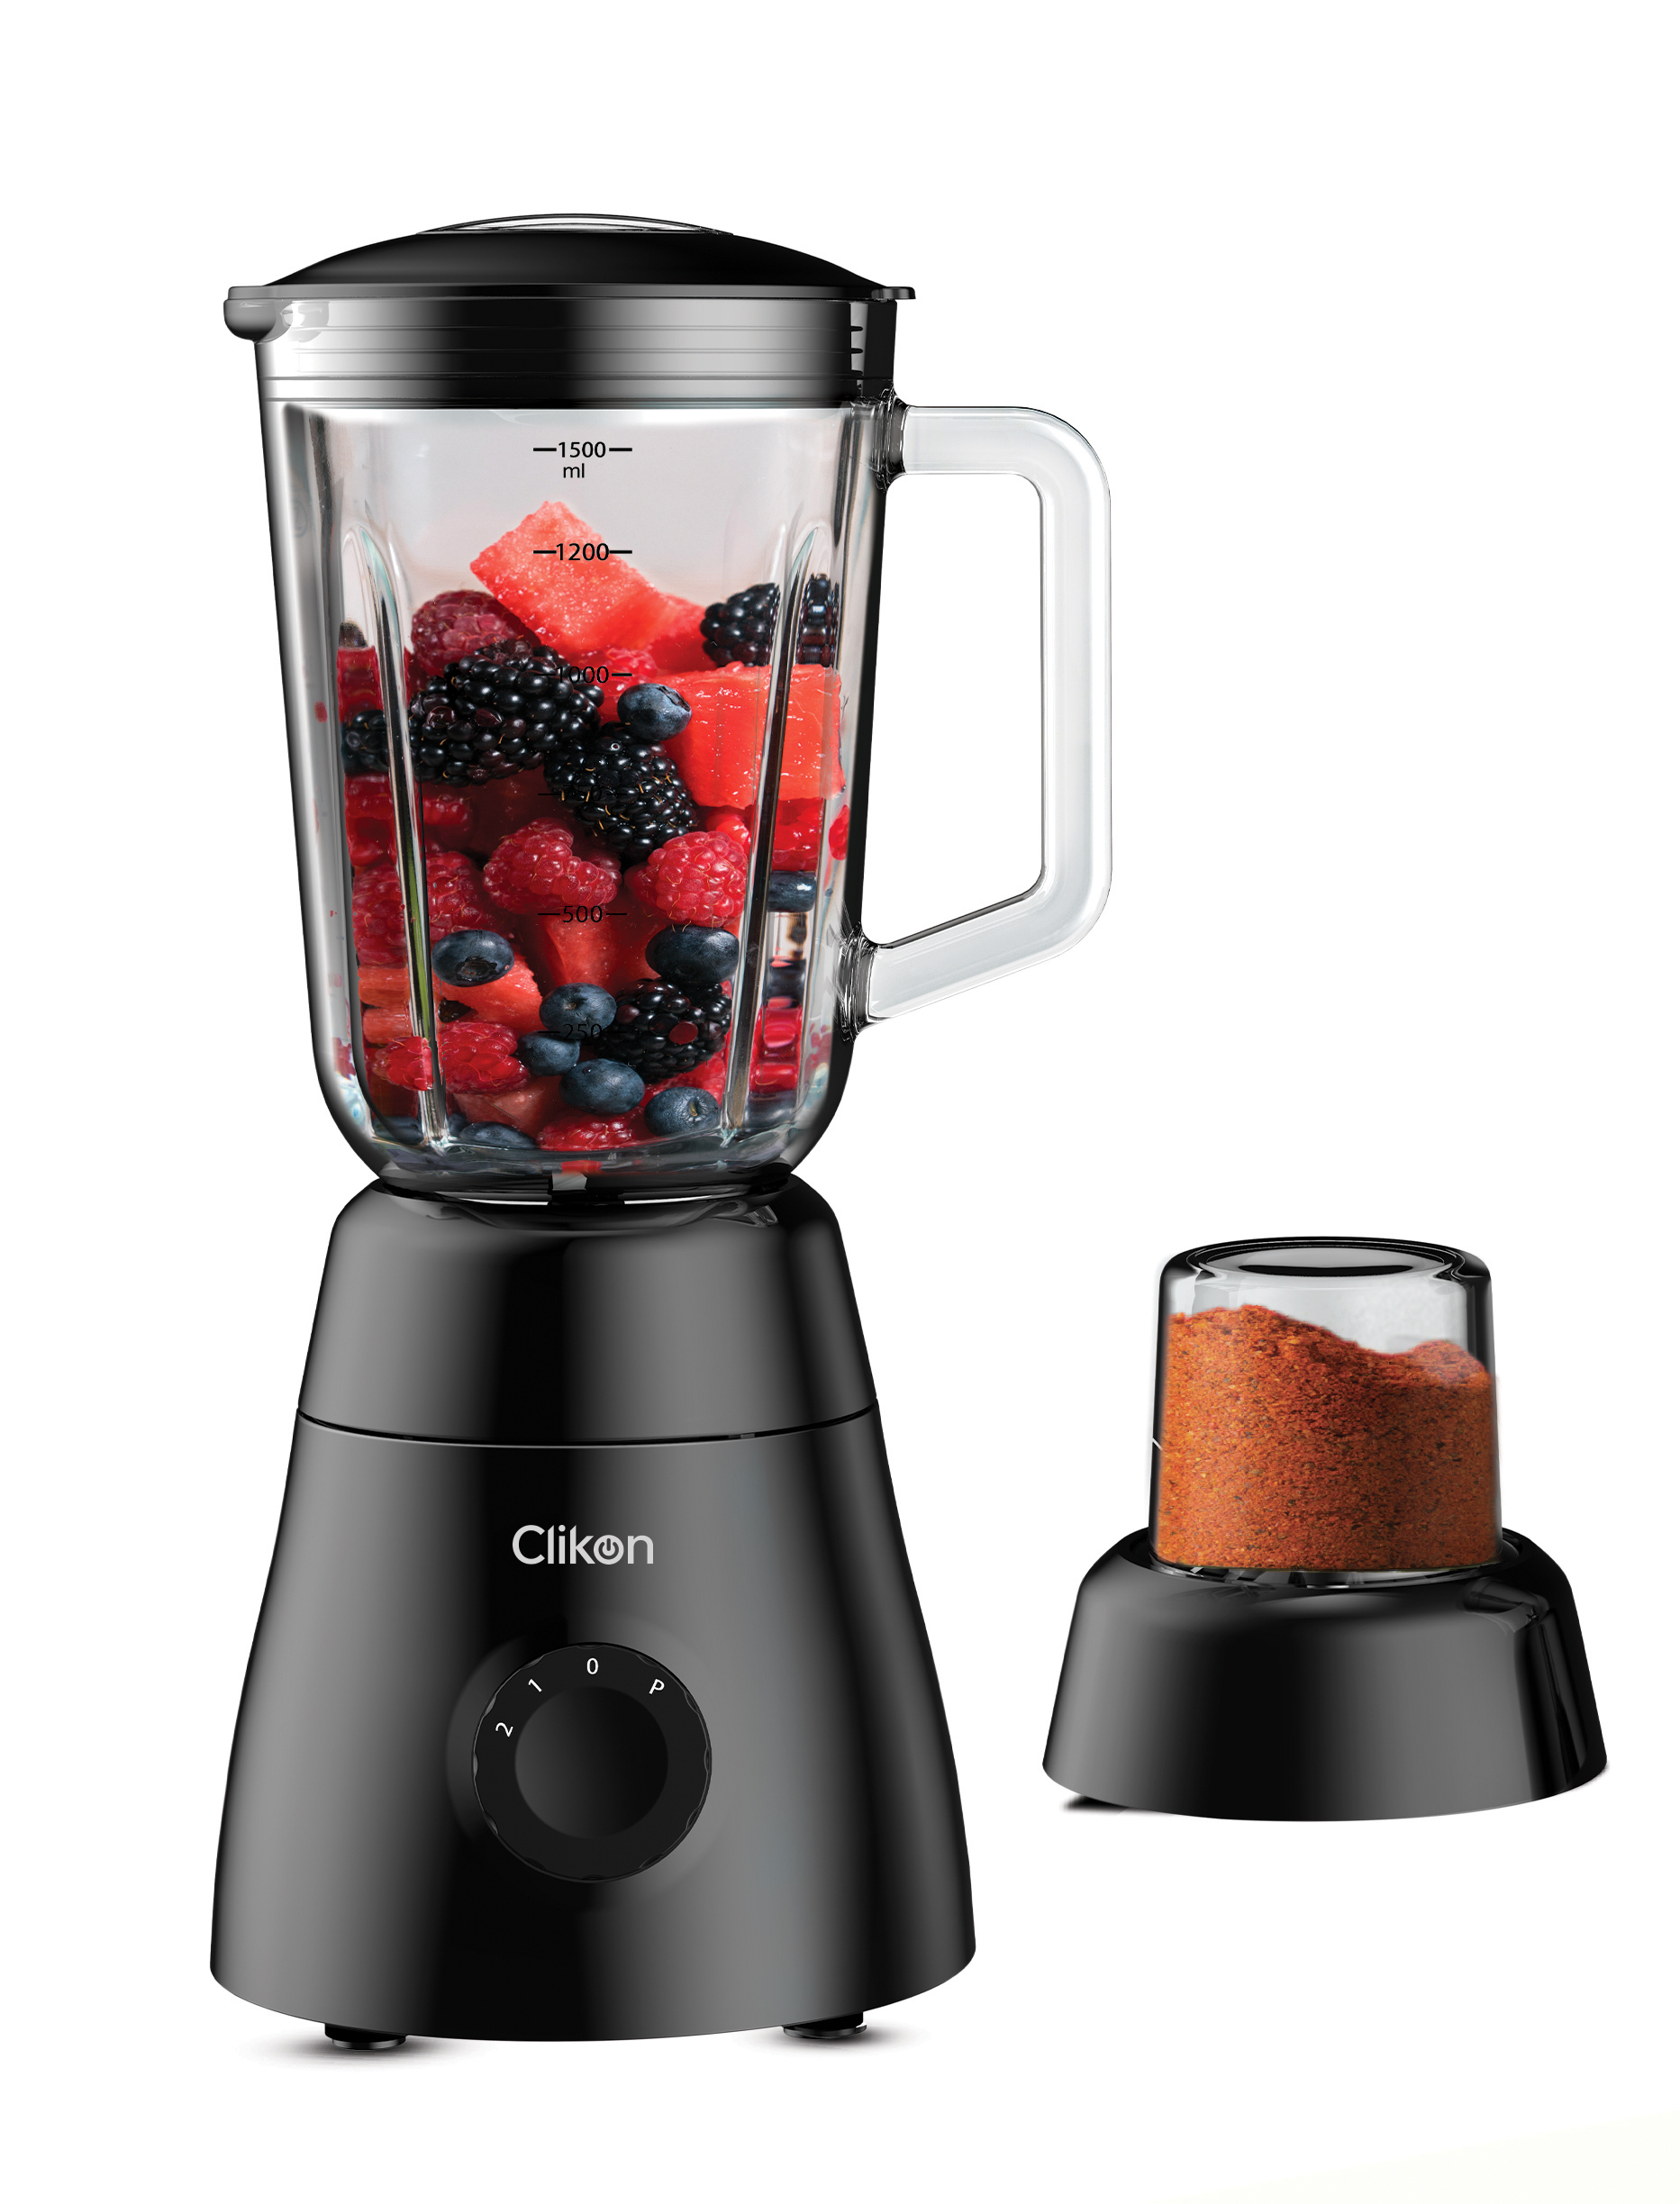 Clikon 2 In 1 Glass Blender 2 Speed Settings With Pulse Control-Ck2674